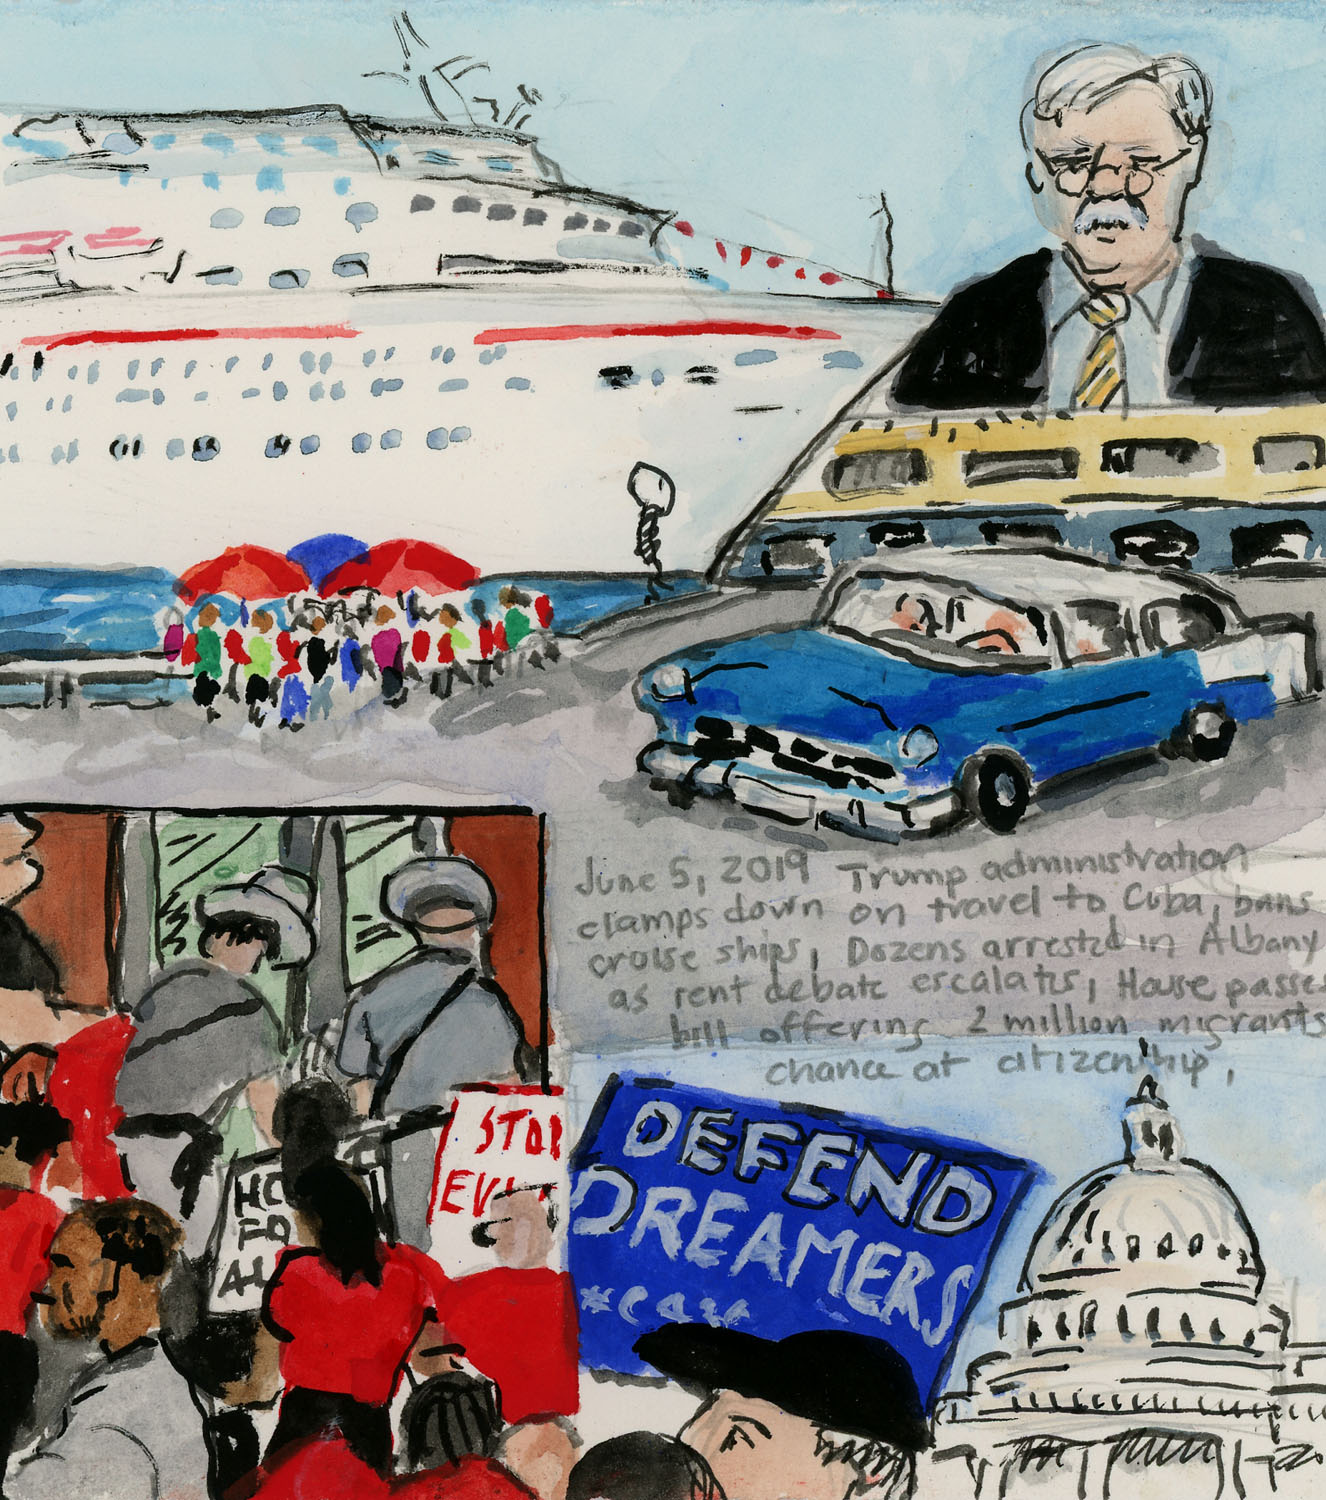 Day 1,292 (June 5, 2019)<br>Ink, gouache, Watercolor, graphite on paper, 6 x 5 ½ in. <br><i>Trump administration clamps down on travel to Cuba, bans cruise ships, Dozens arrested in Albany as rent debate escalates, House passes bill offering 2 million migrants a chance at citizenship.</i> 